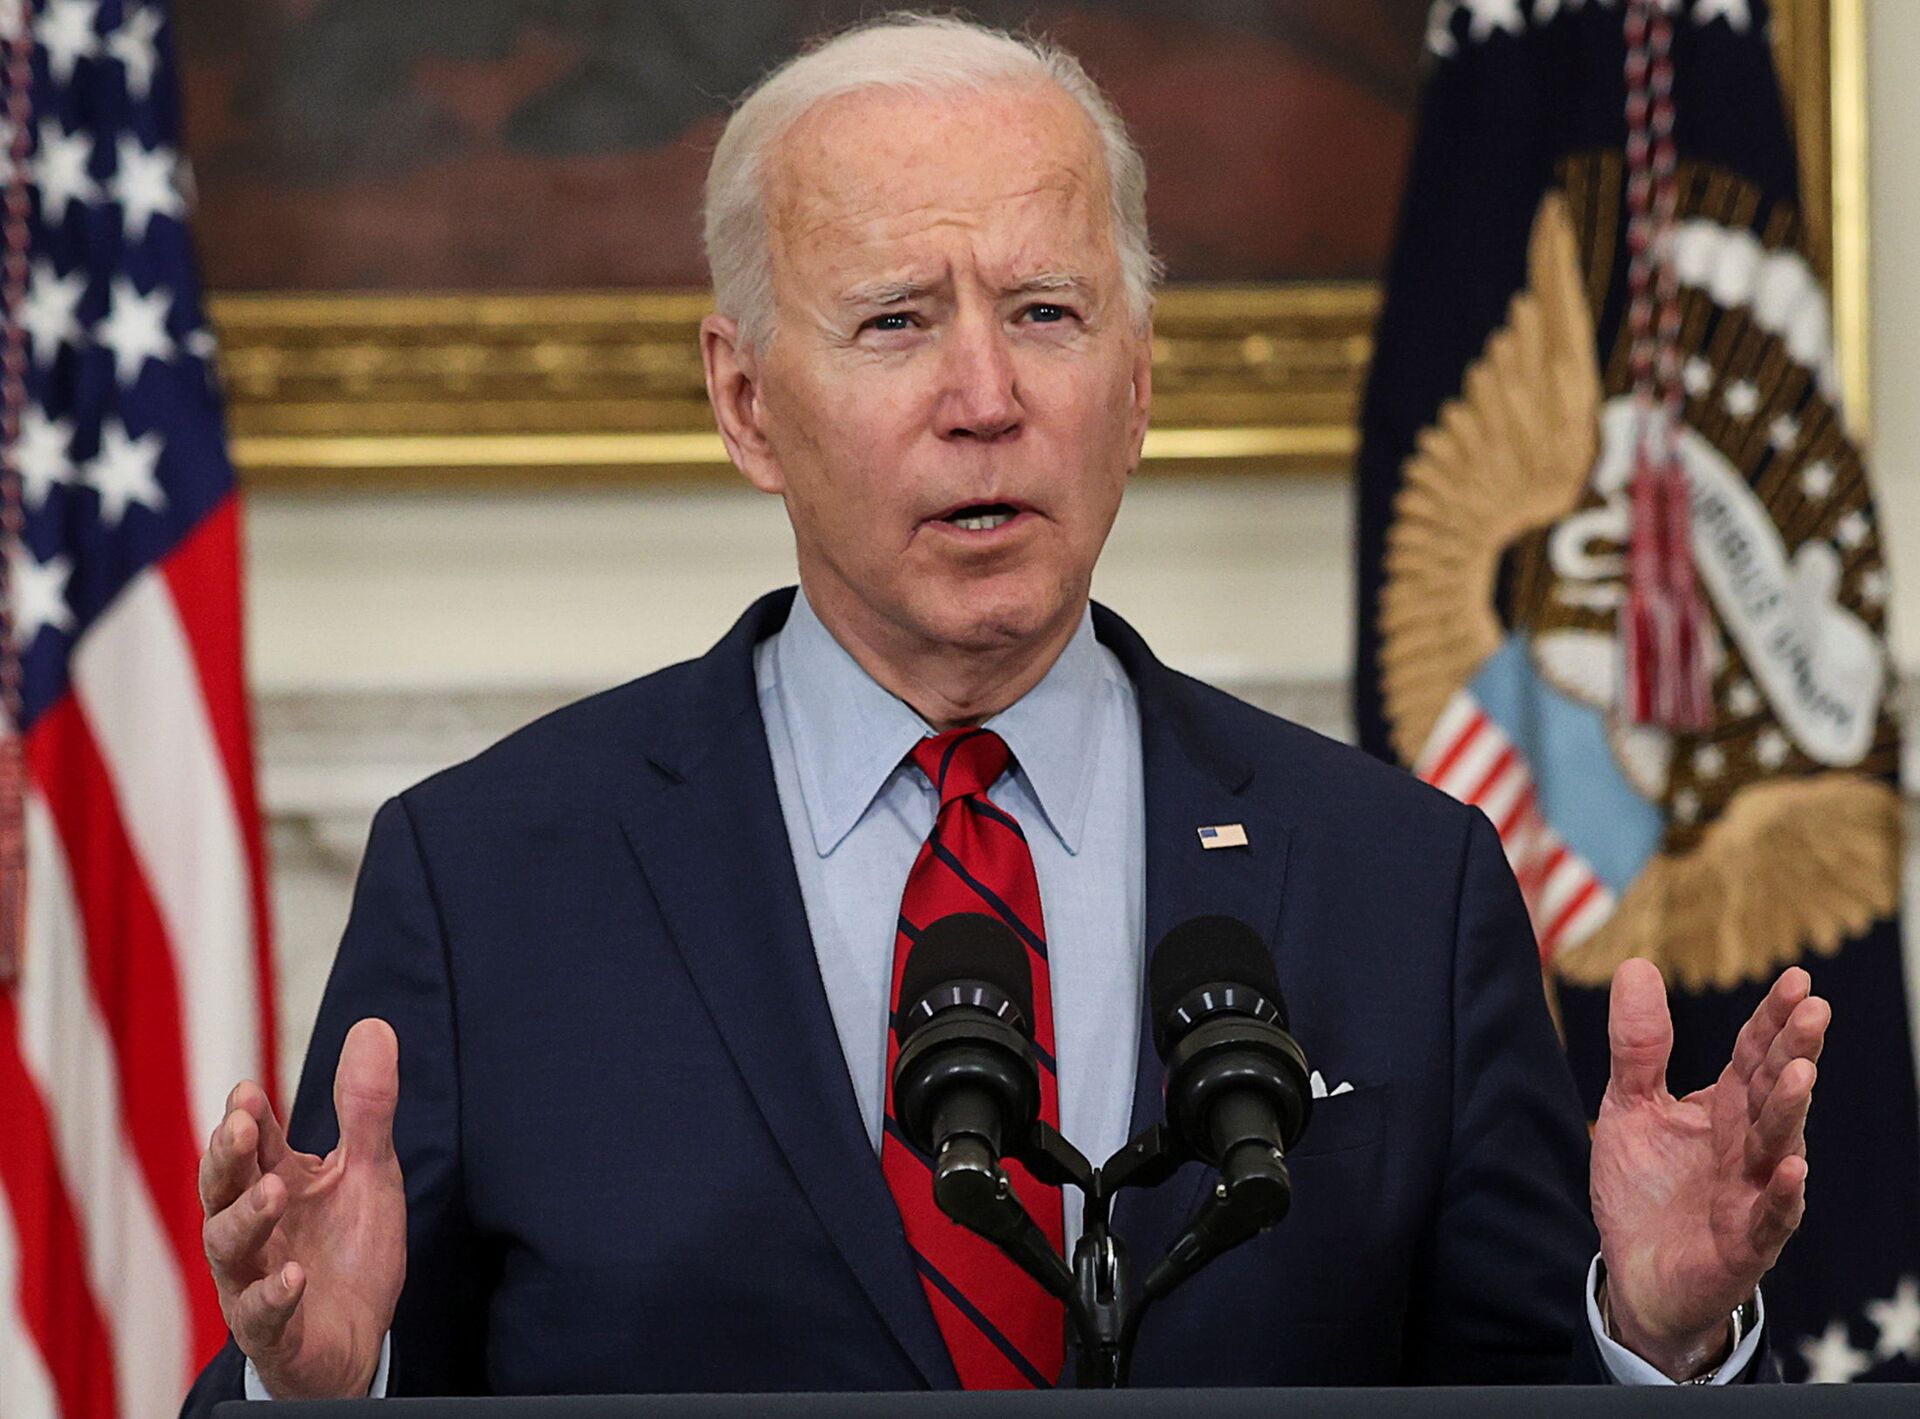 Government Accountability Office Reportedly Opens Inquiry Into Biden's Freeze of Border Wall Funds - Sputnik International, 1920, 24.03.2021